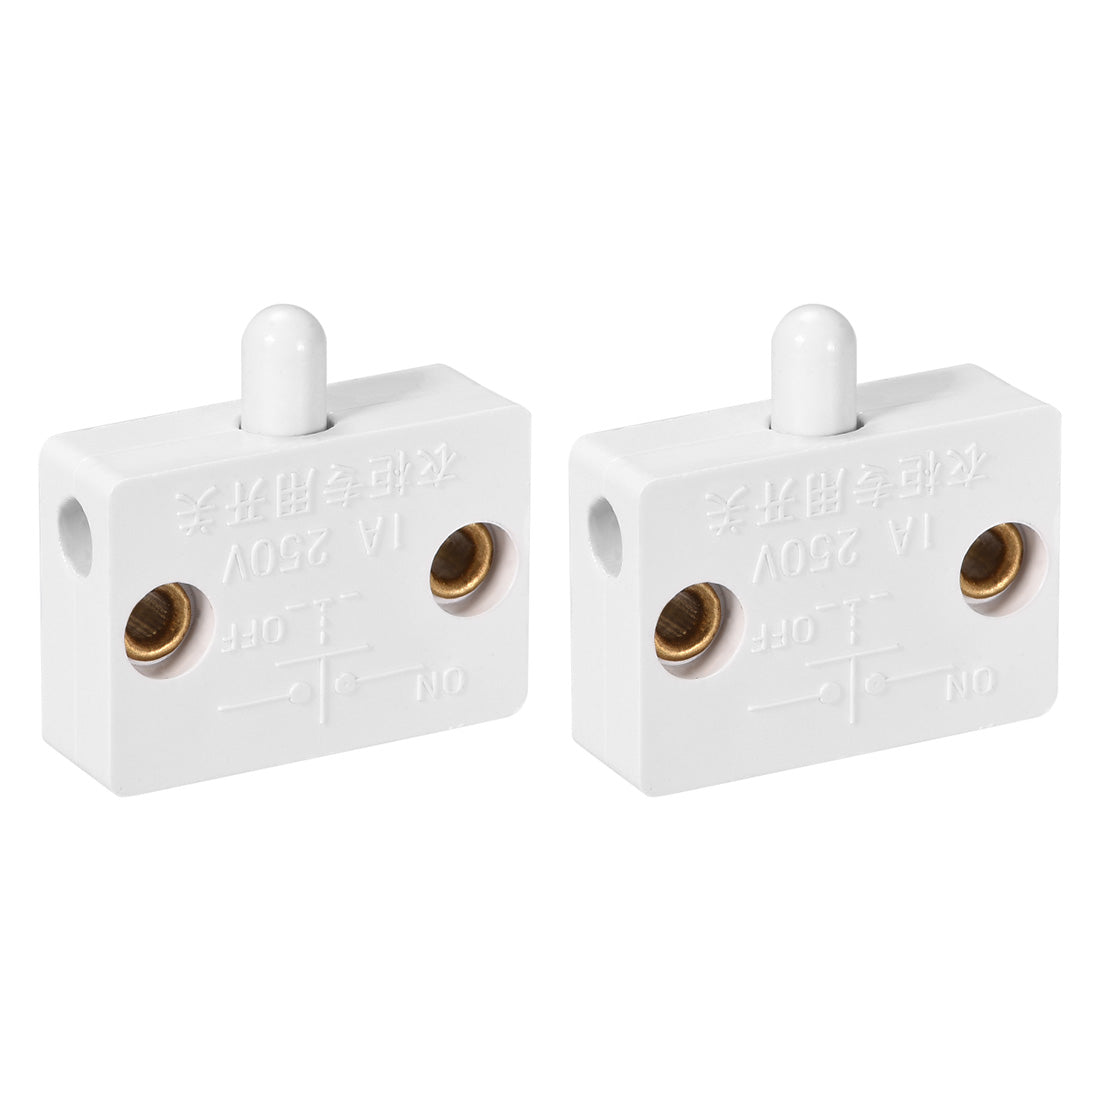 uxcell Uxcell Wardrobe Door Light Switch Momentary Cabinet Closet Switch Normally Closed 110-250V 1A White 2 Pcs